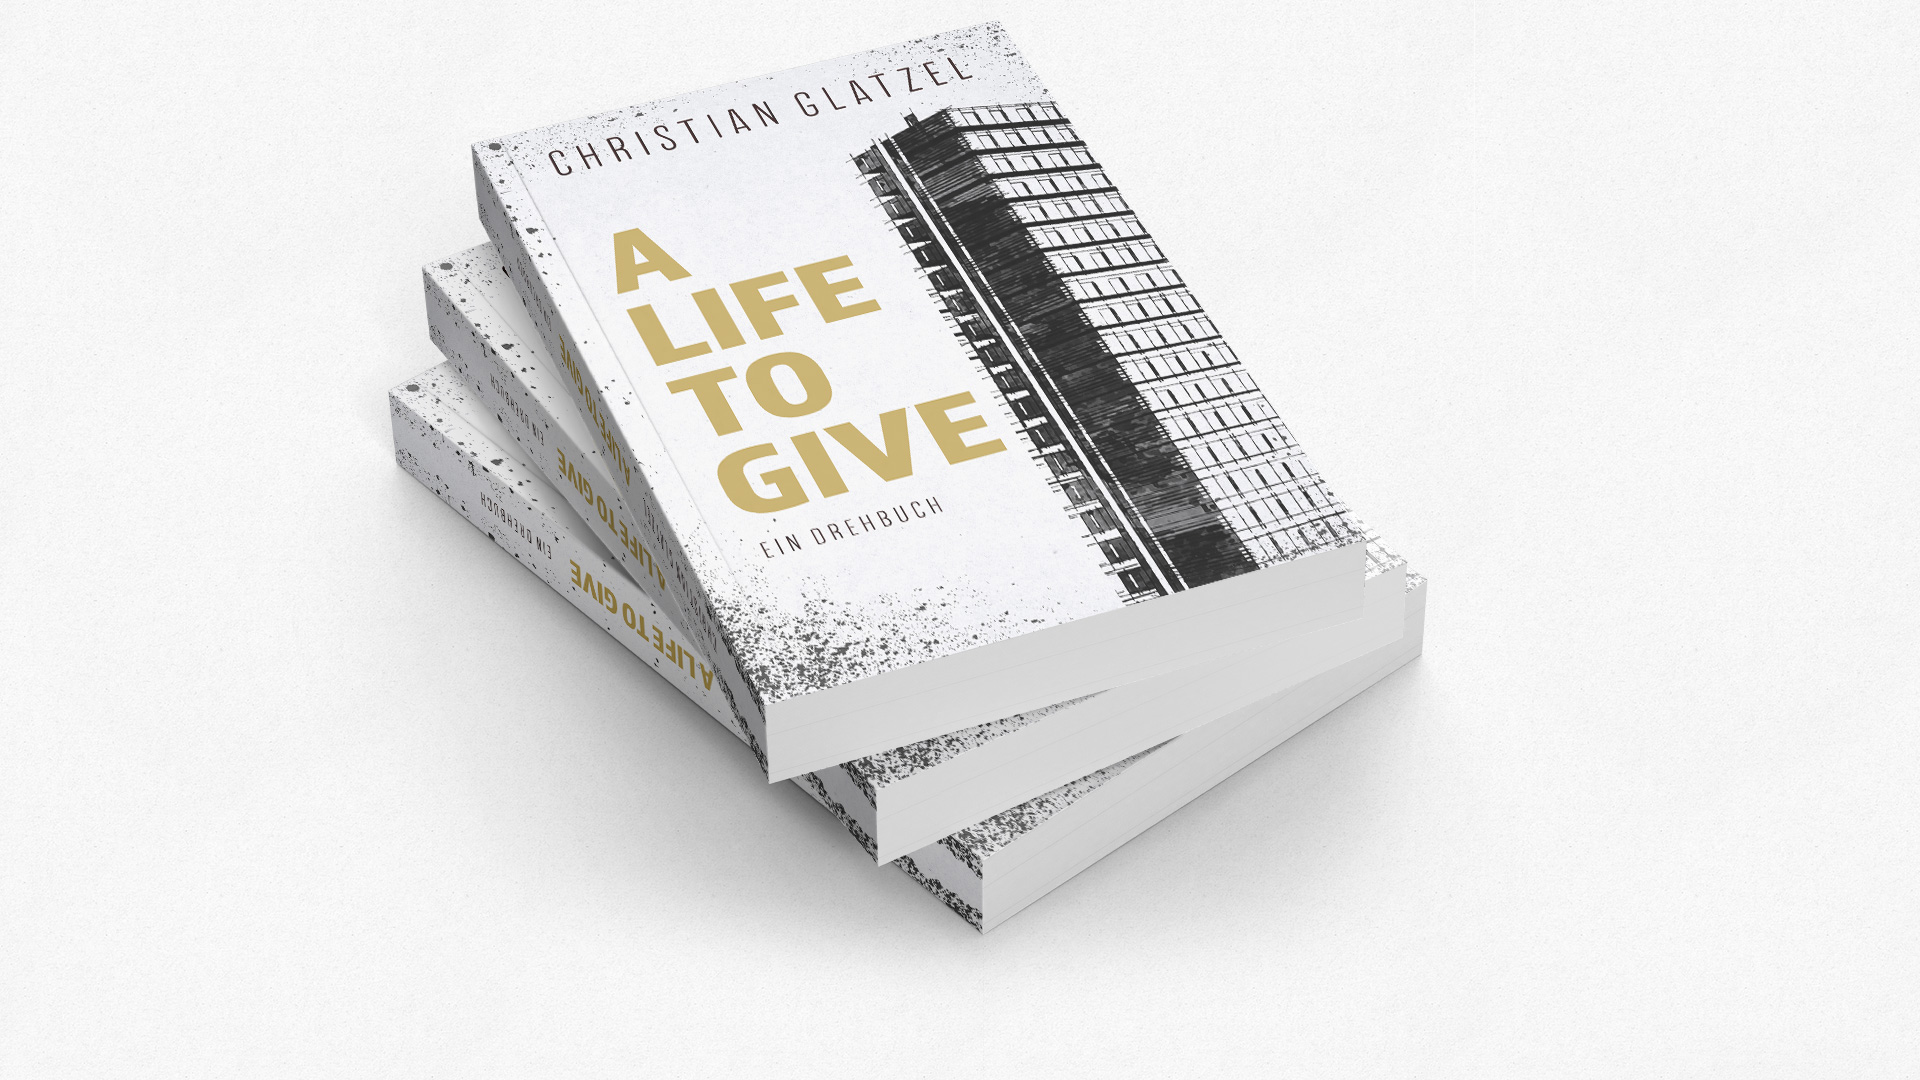 A LIFE TO GIVE